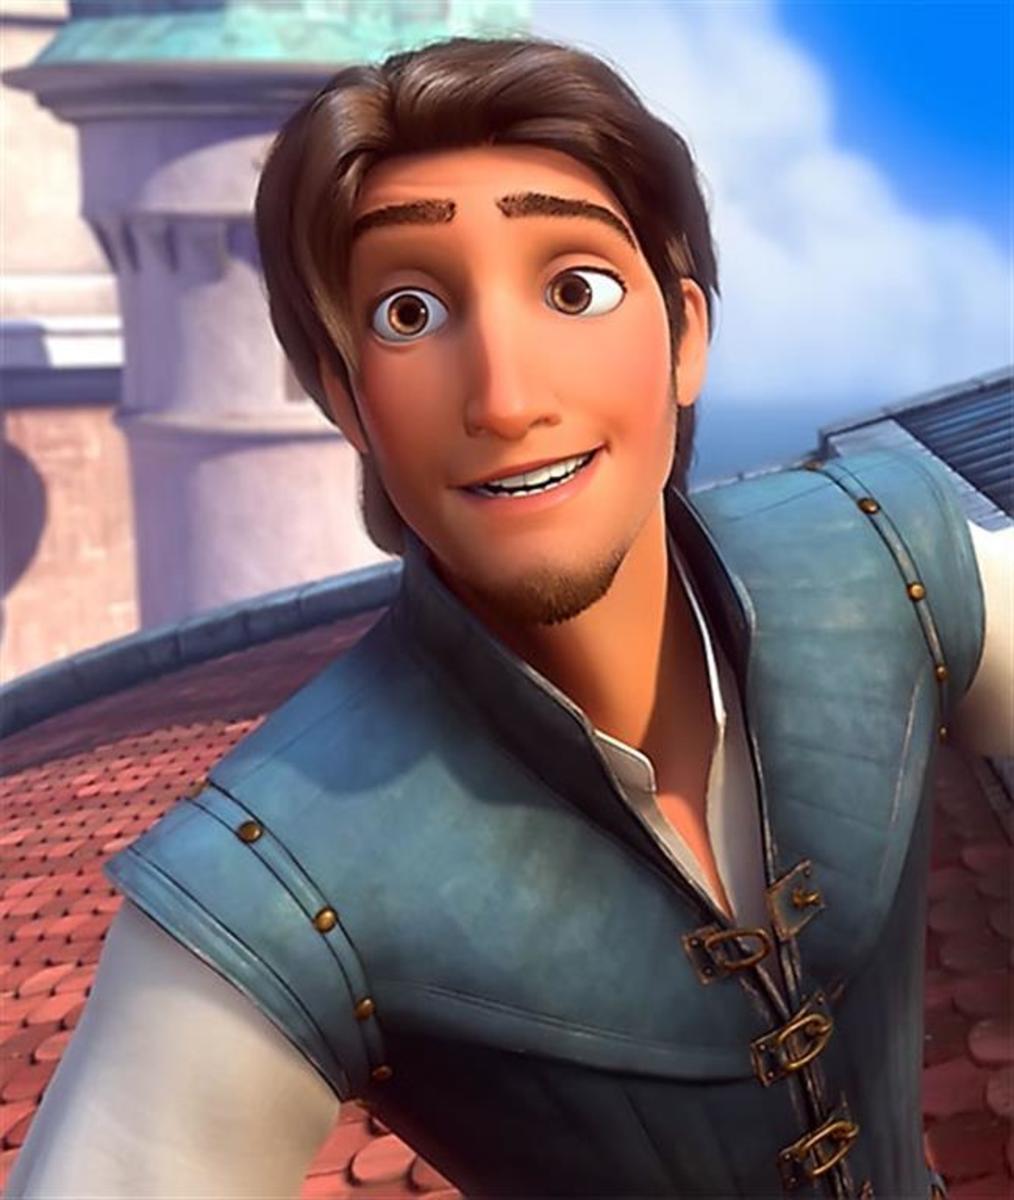 Top 12 Cutest and Hottest Male Disney Characters - ReelRundown